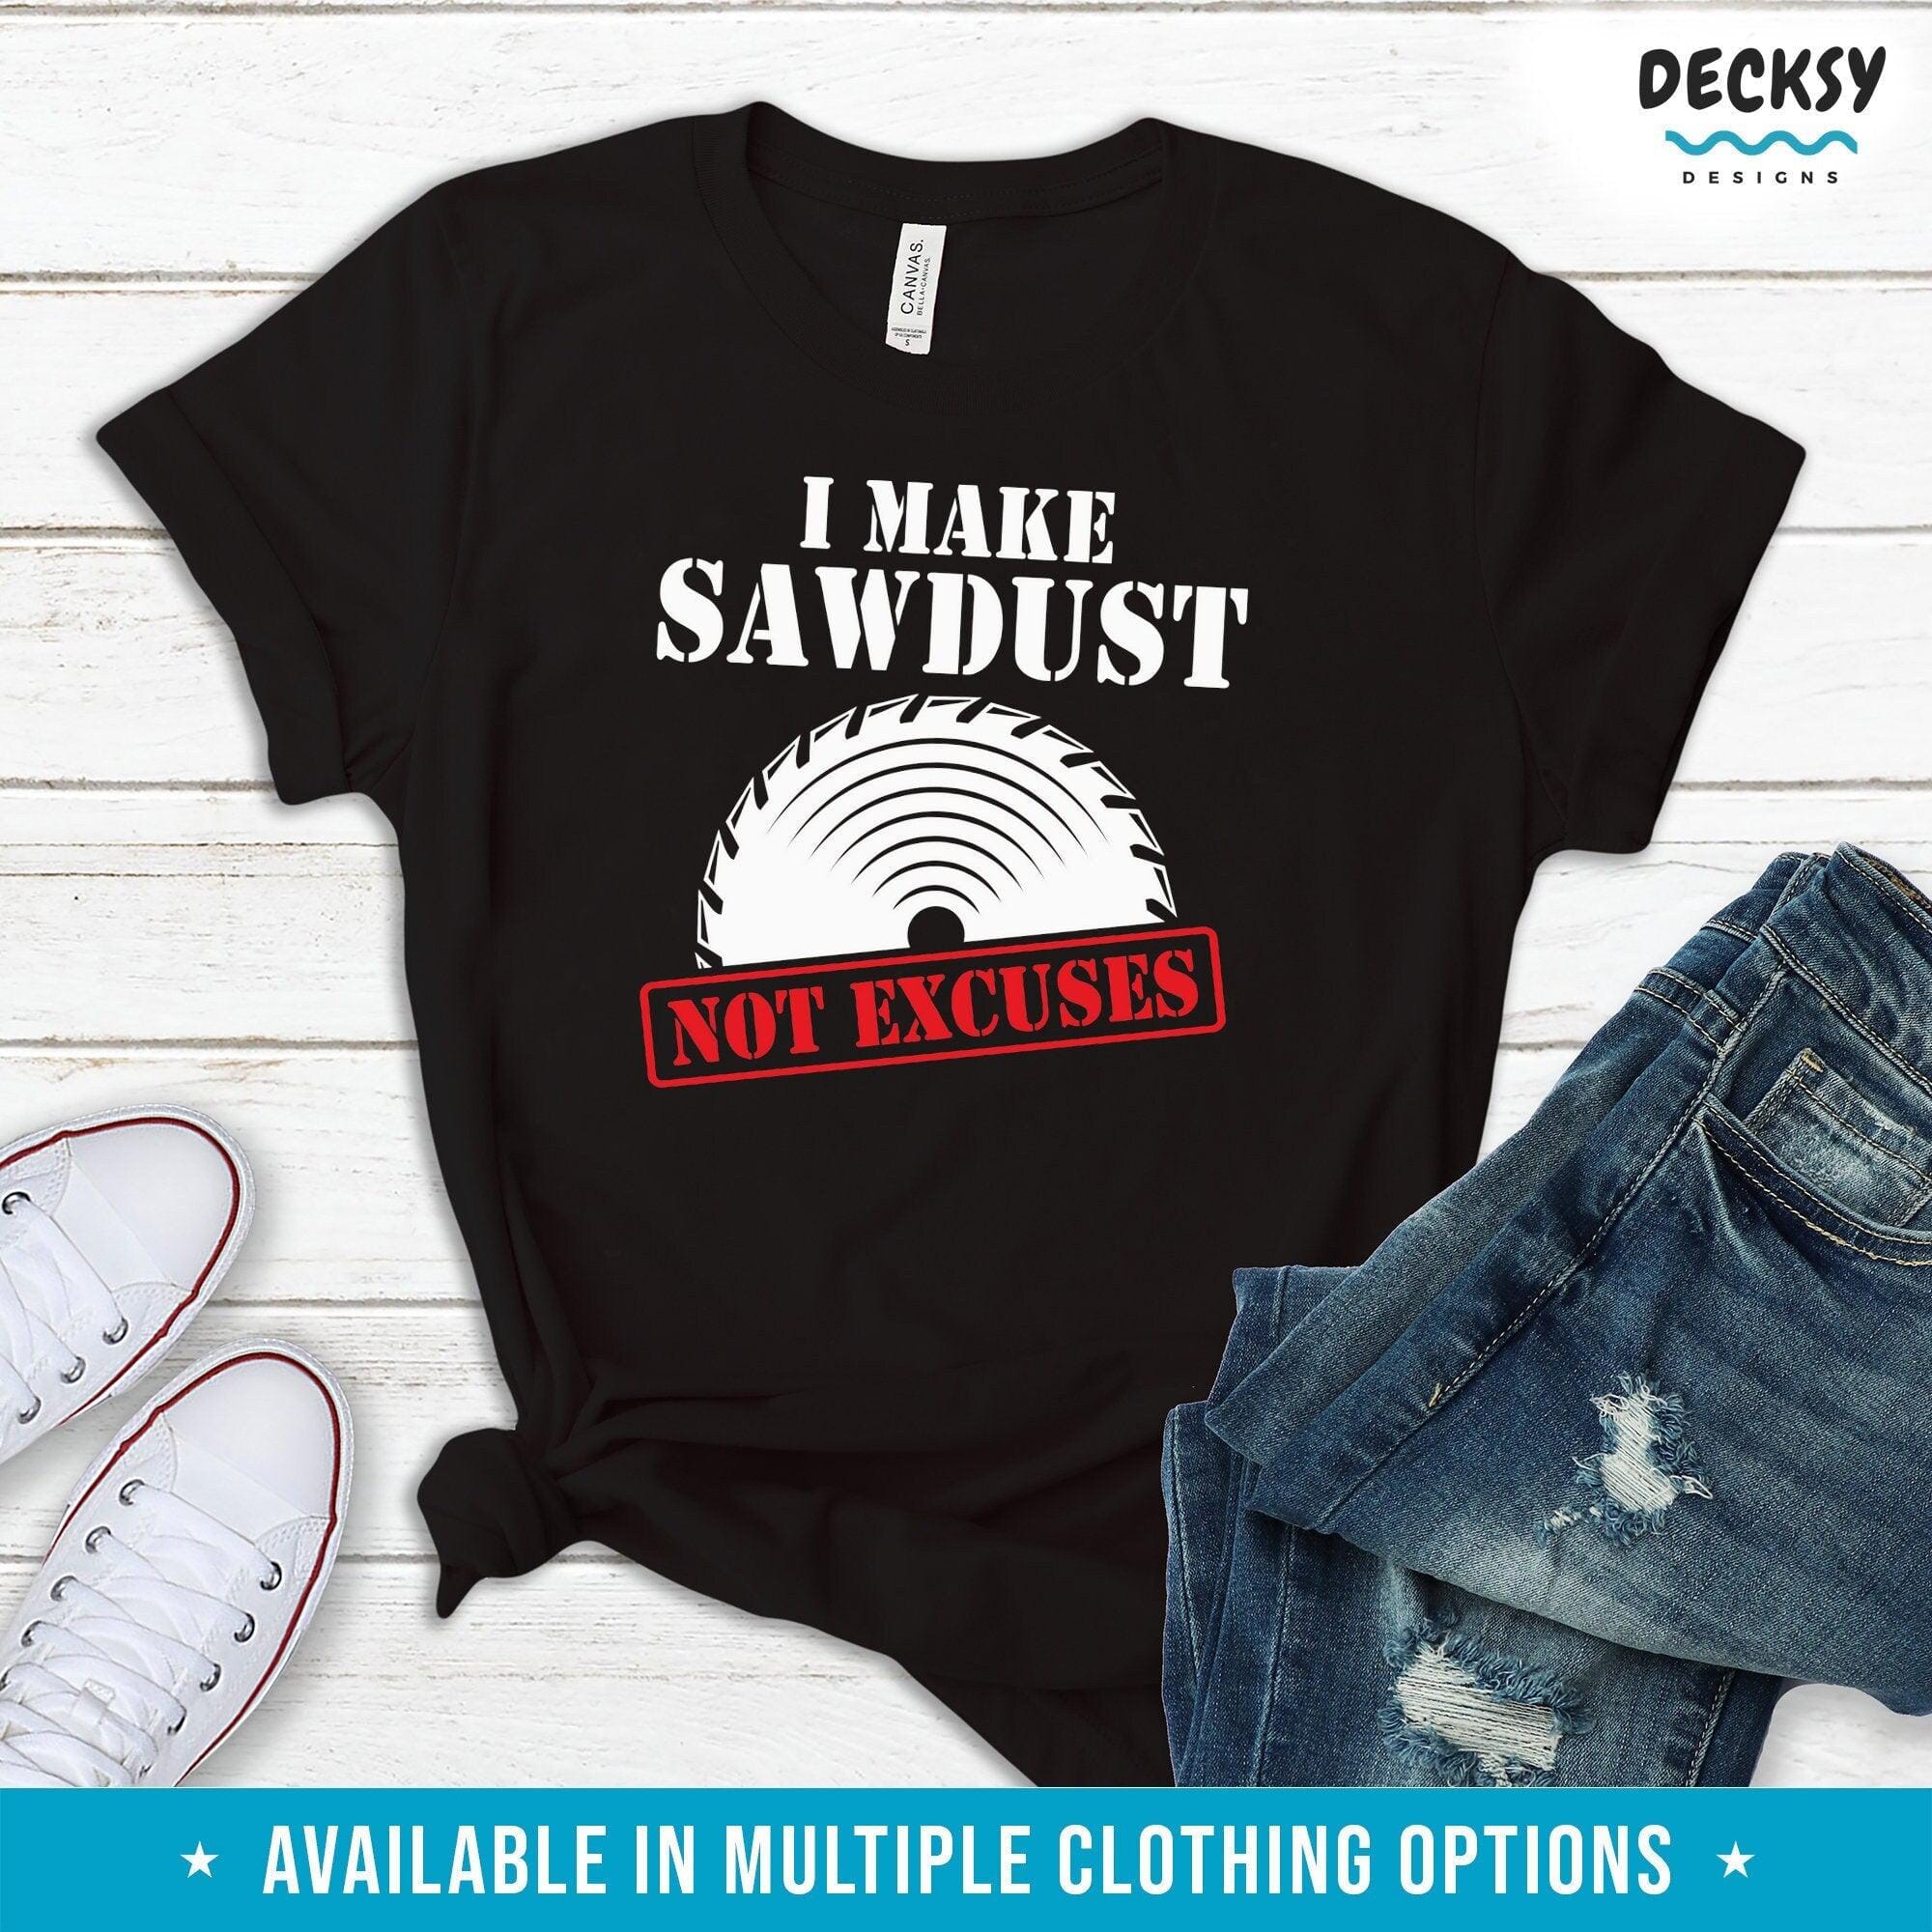 Carpentry Shirt, Gift For Carpenter-Clothing:Gender-Neutral Adult Clothing:Tops & Tees:T-shirts:Graphic Tees-DecksyDesigns